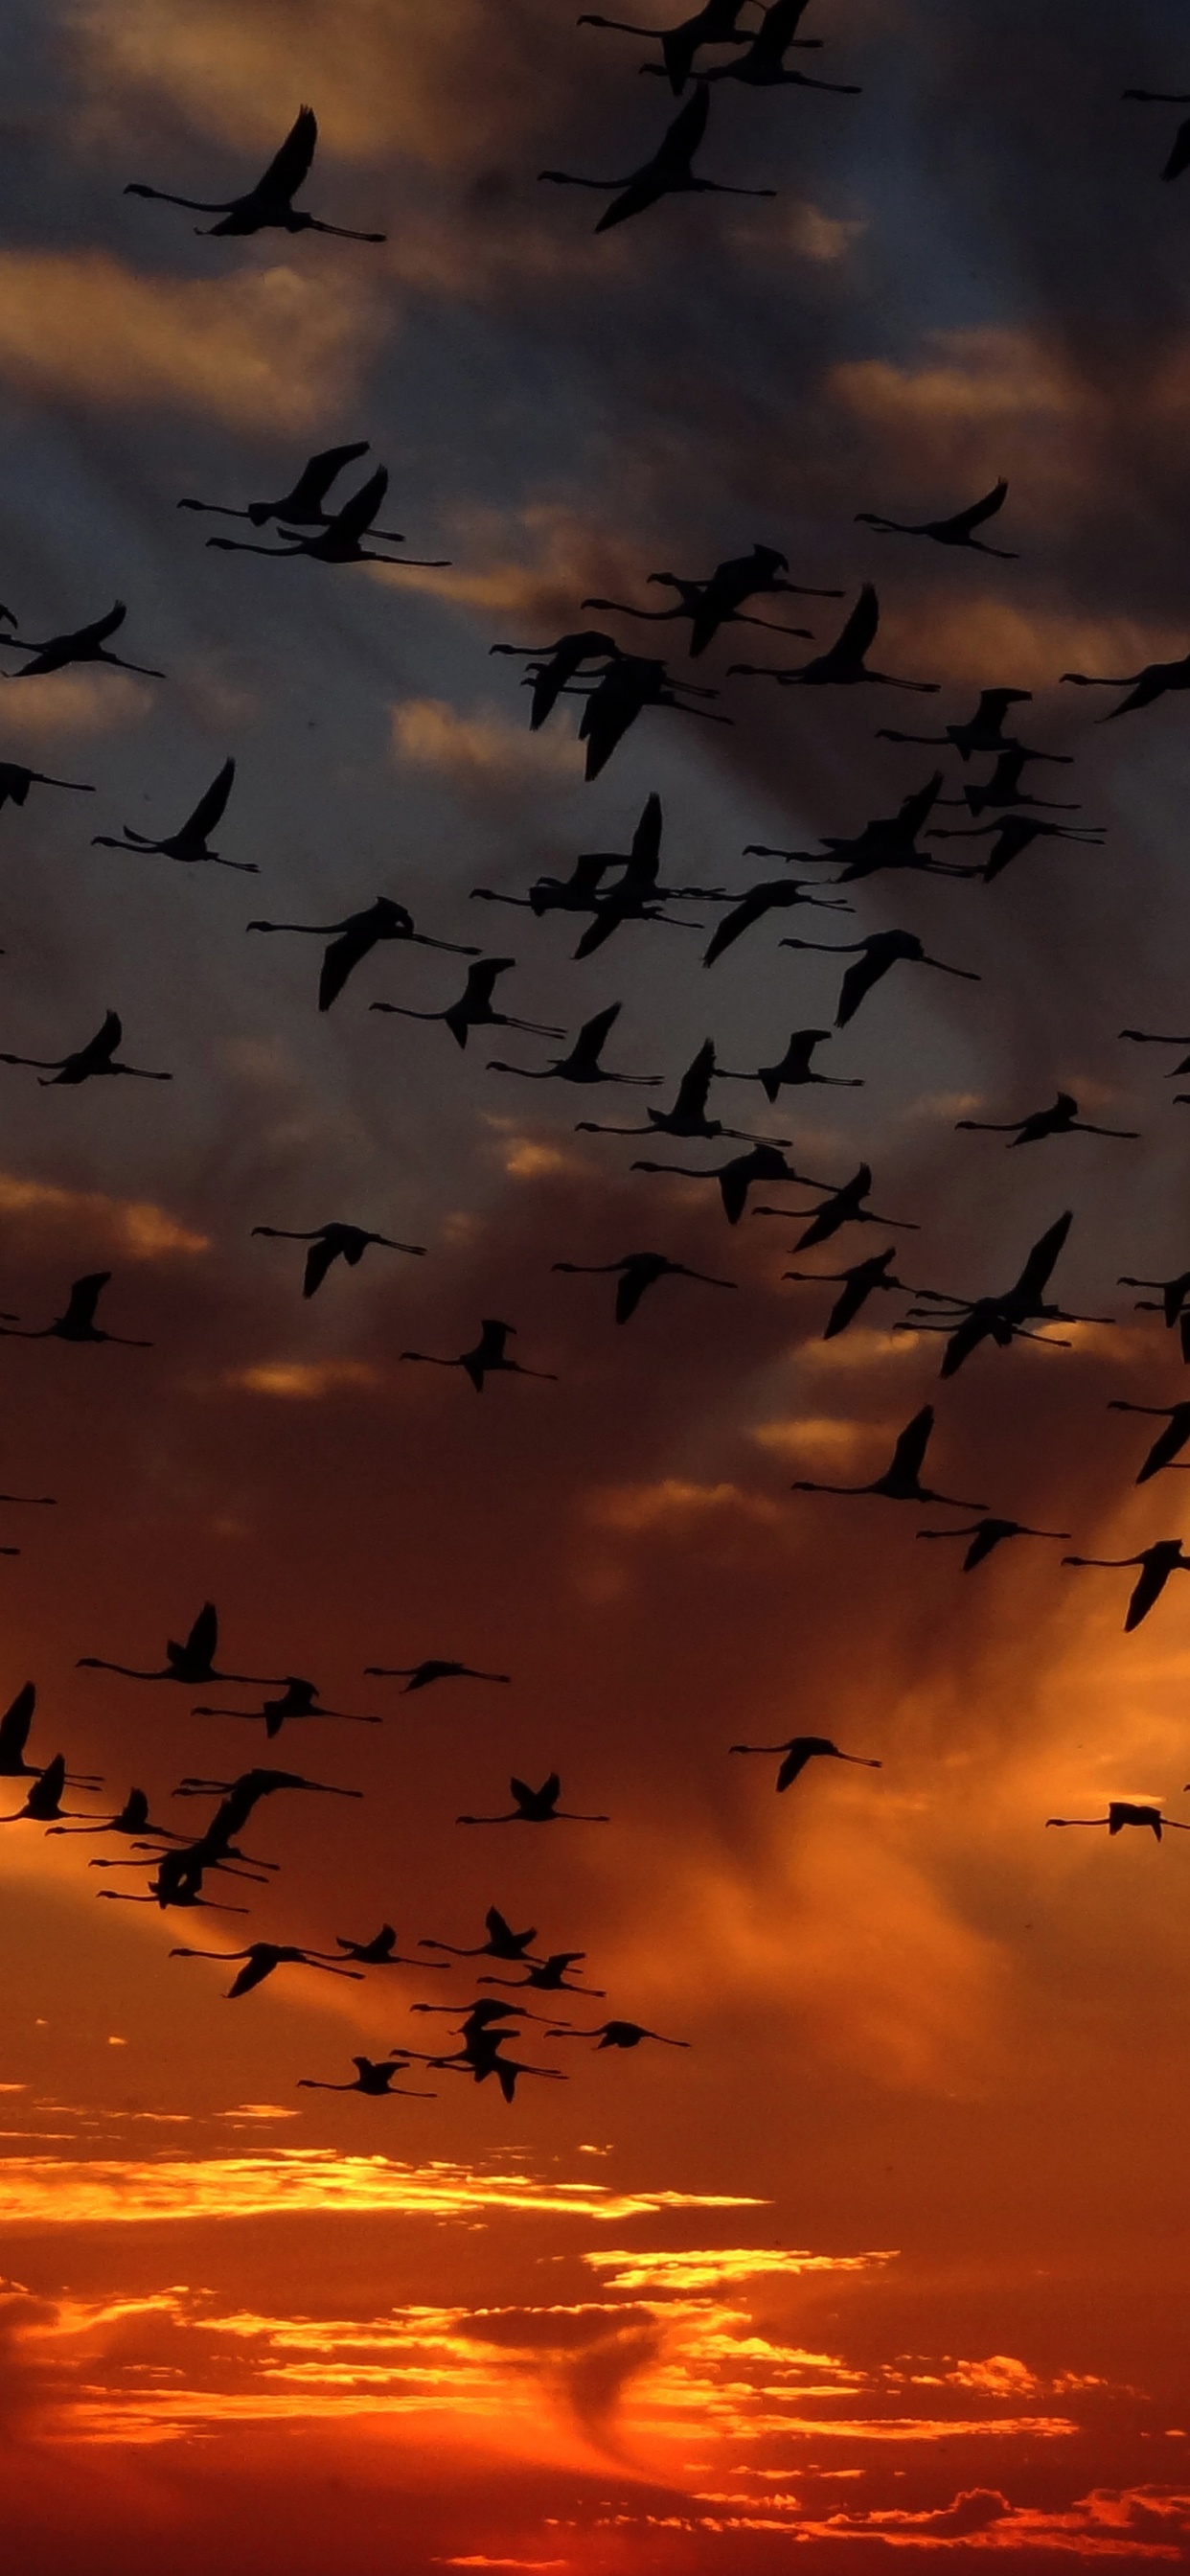 Silhouette of Flock of Birds Flying During Sunset. Wallpaper in 1242x2688 Resolution